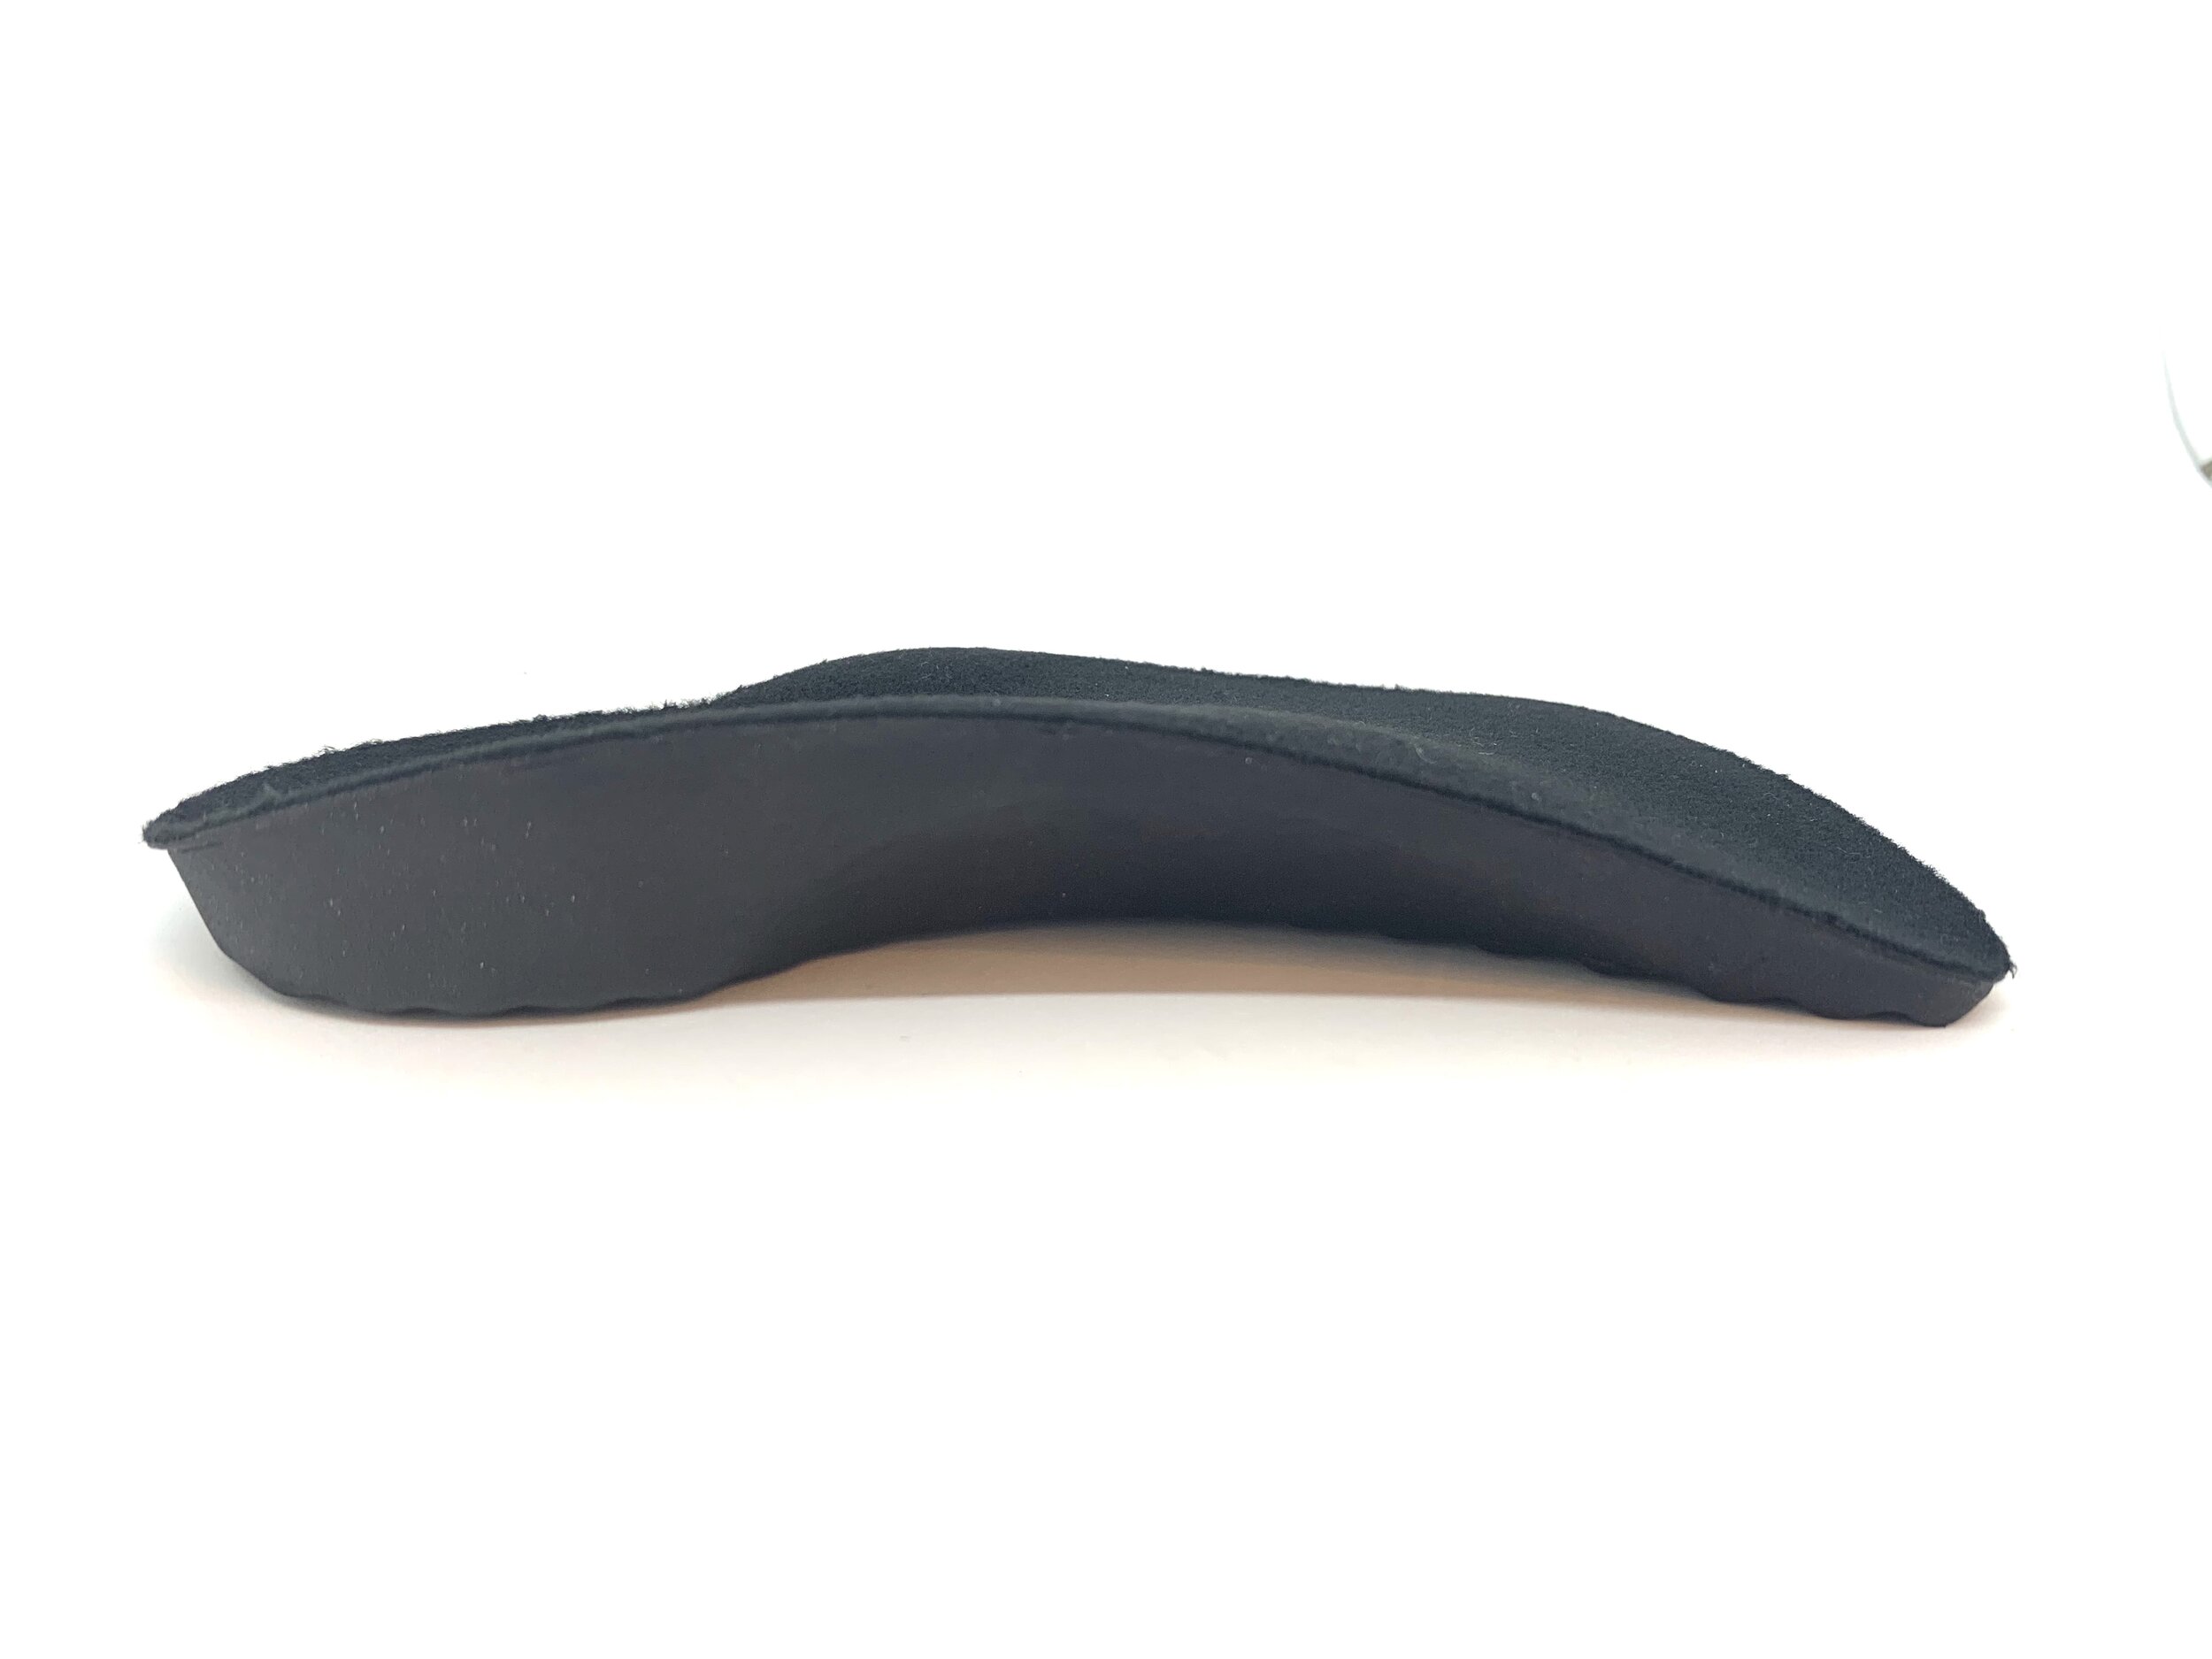 Severs or Achillies Pain relief — Lifesoles Orthotic Insoles